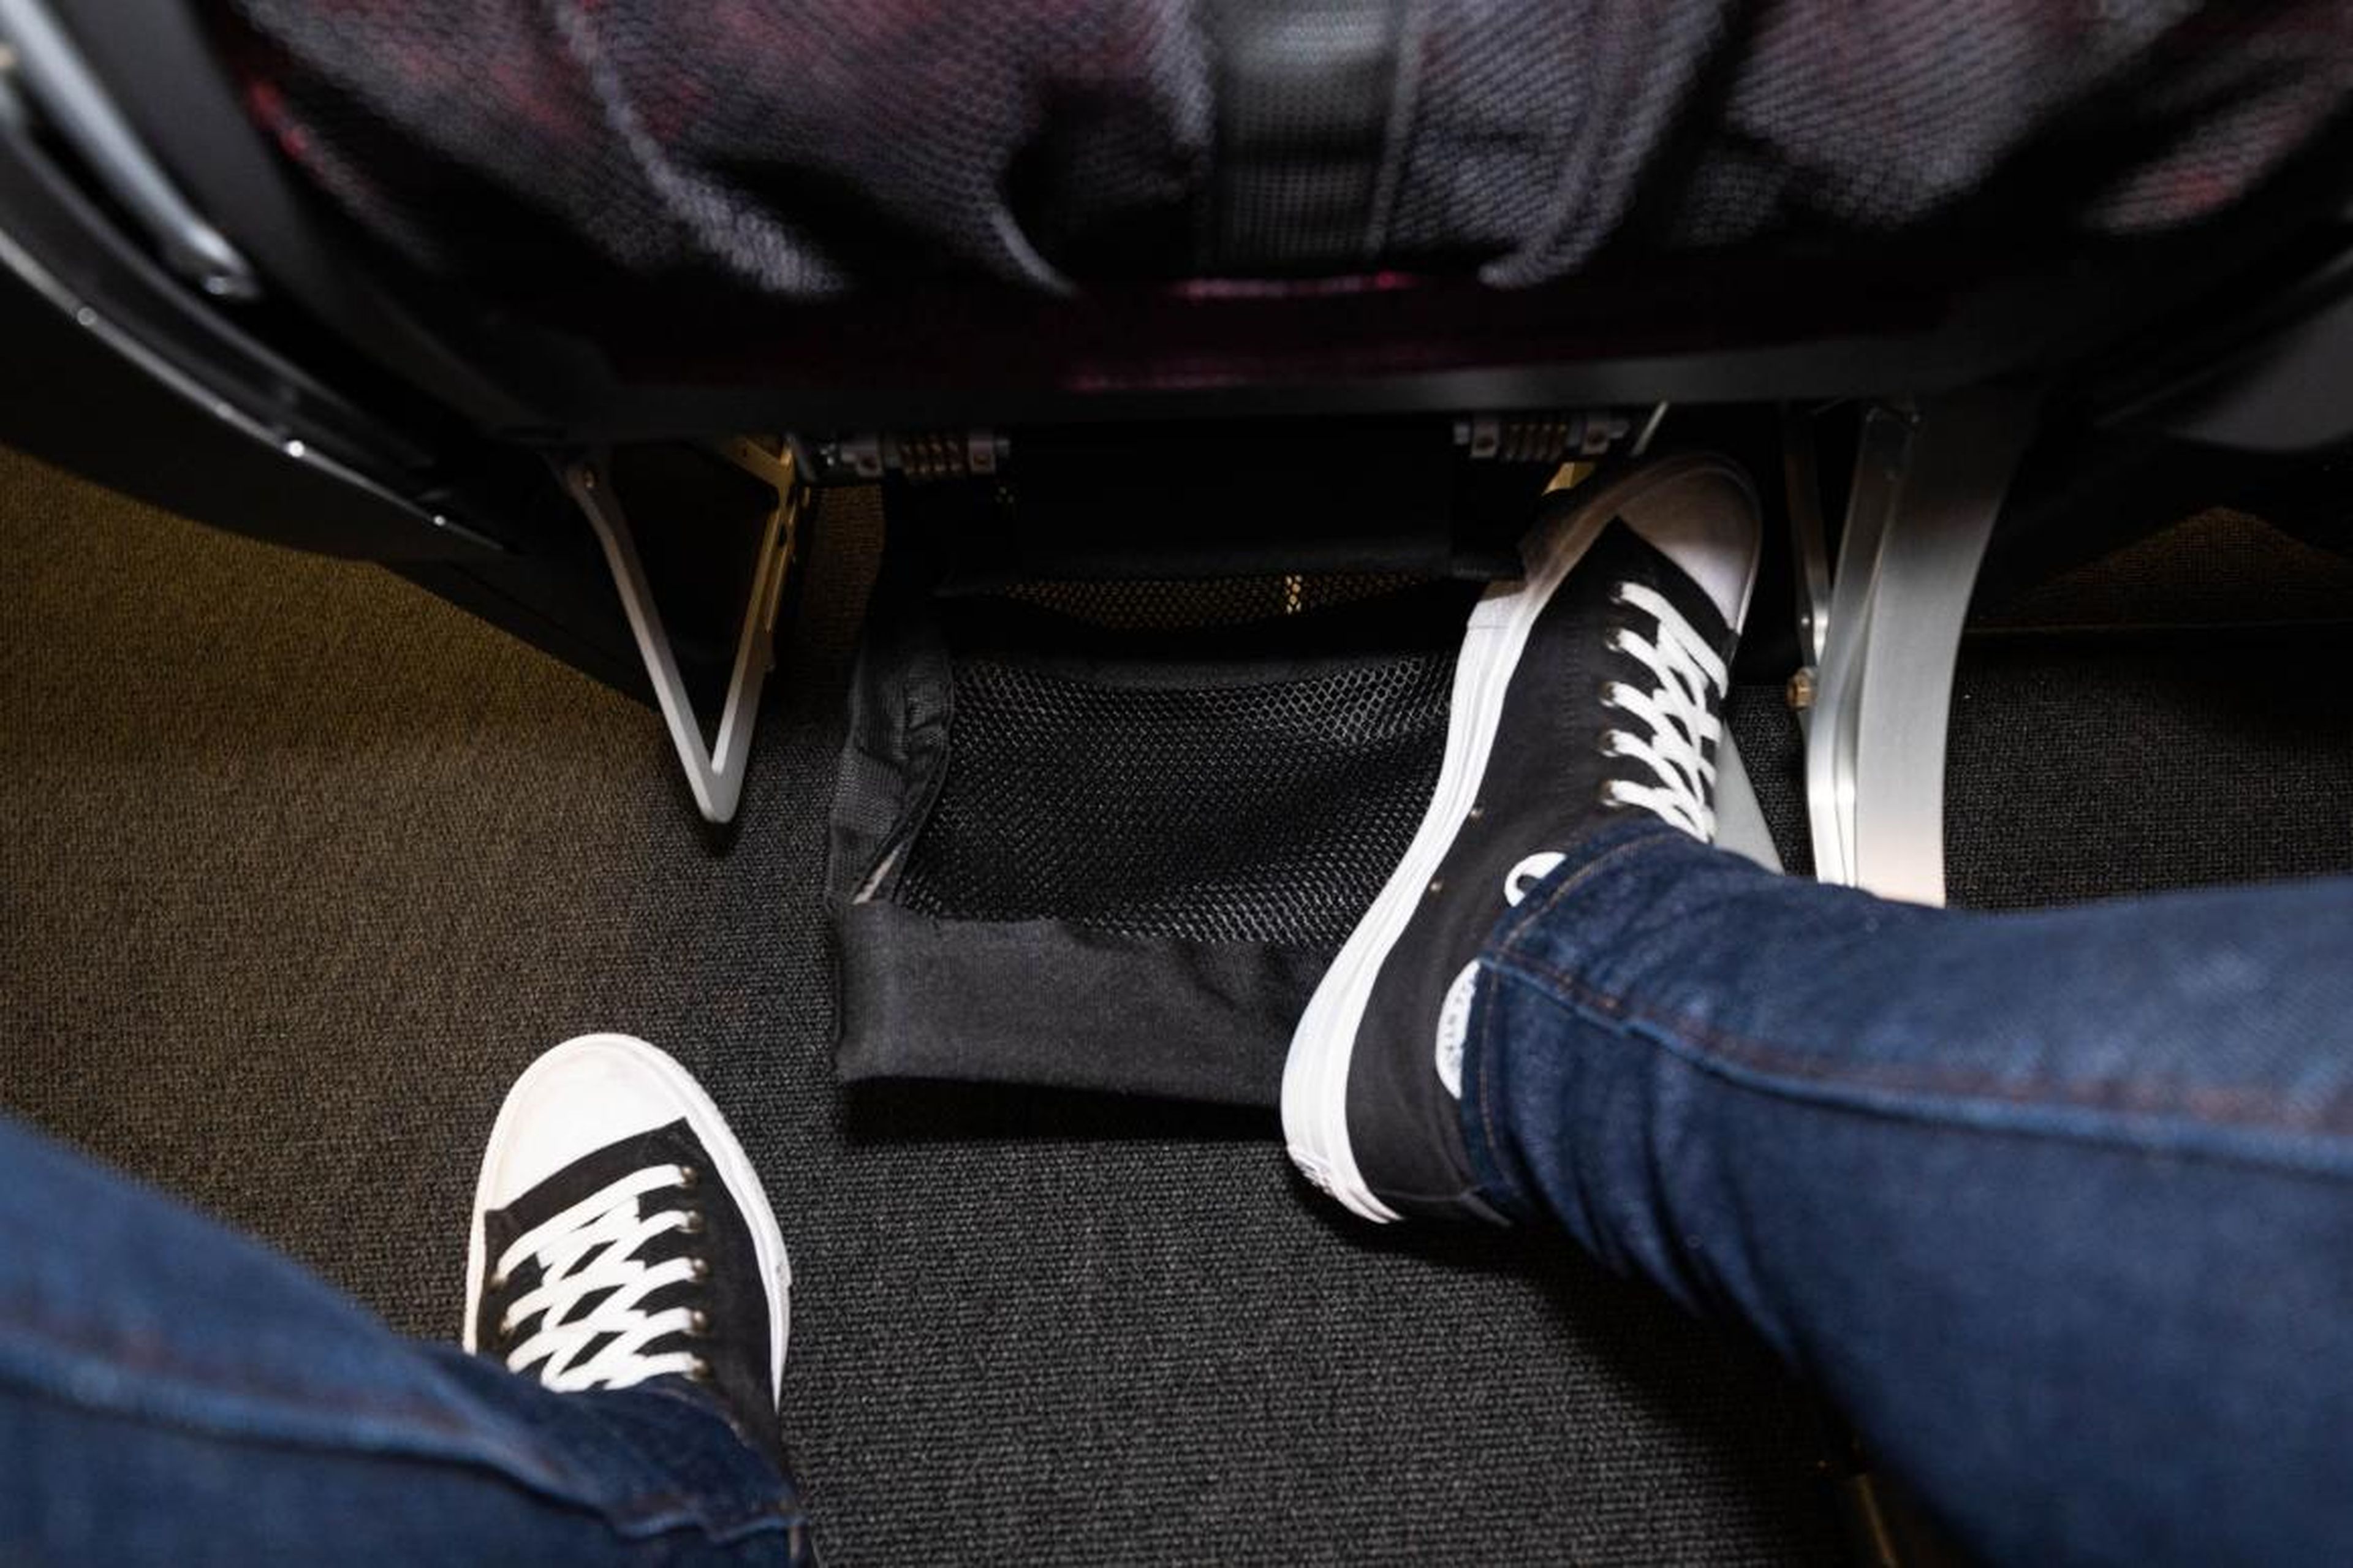 Economy seats also have an adapted version of the premium-economy footrest, which was definitely an improvement.